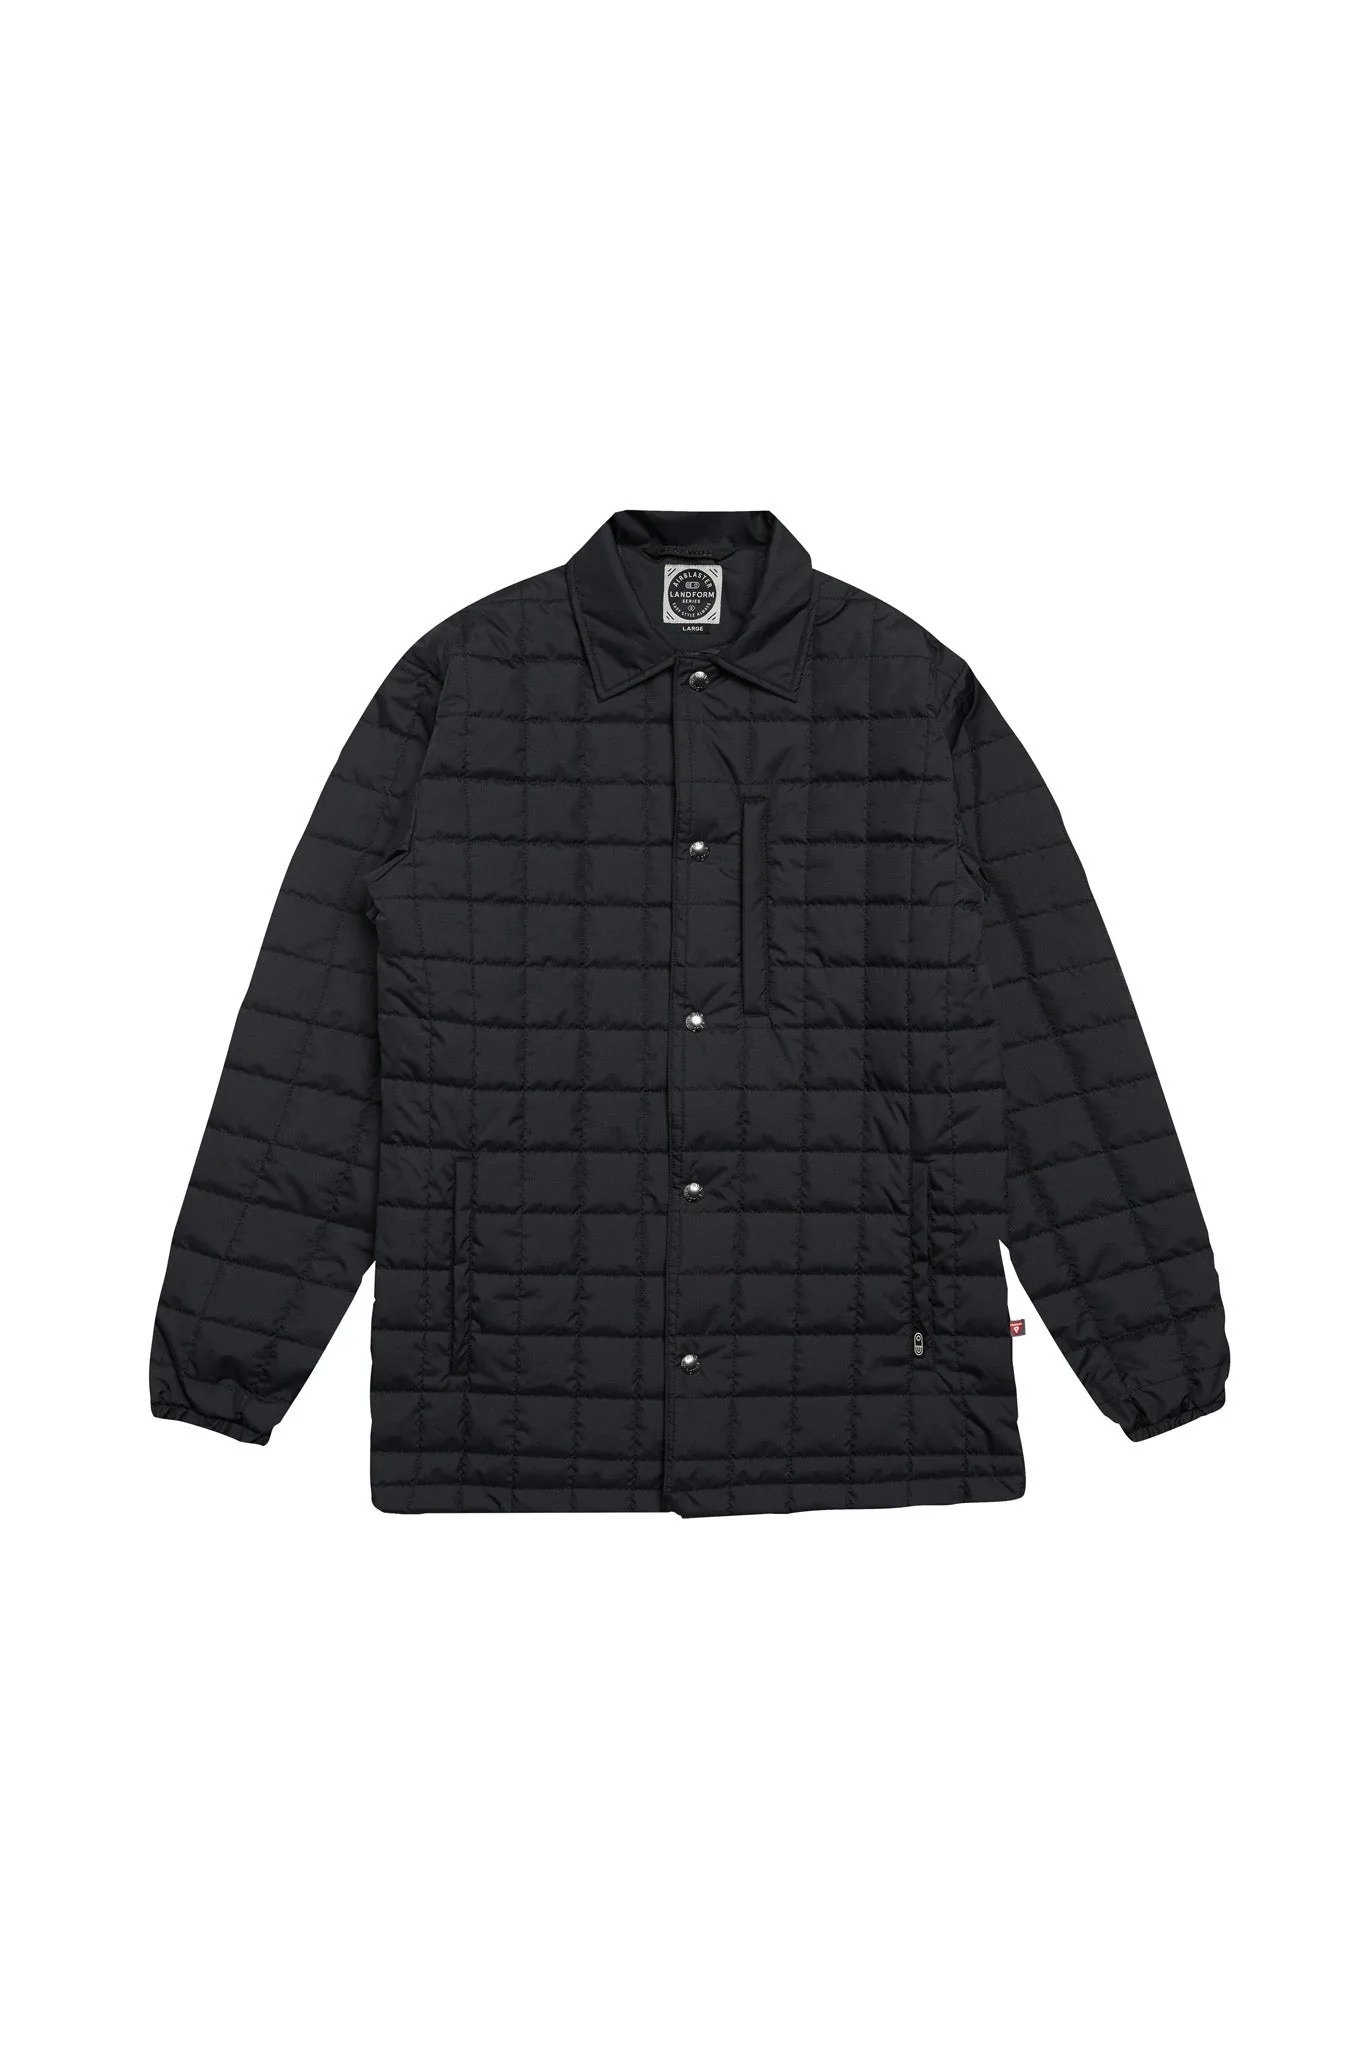 Airblaster QUILTED SHIRT